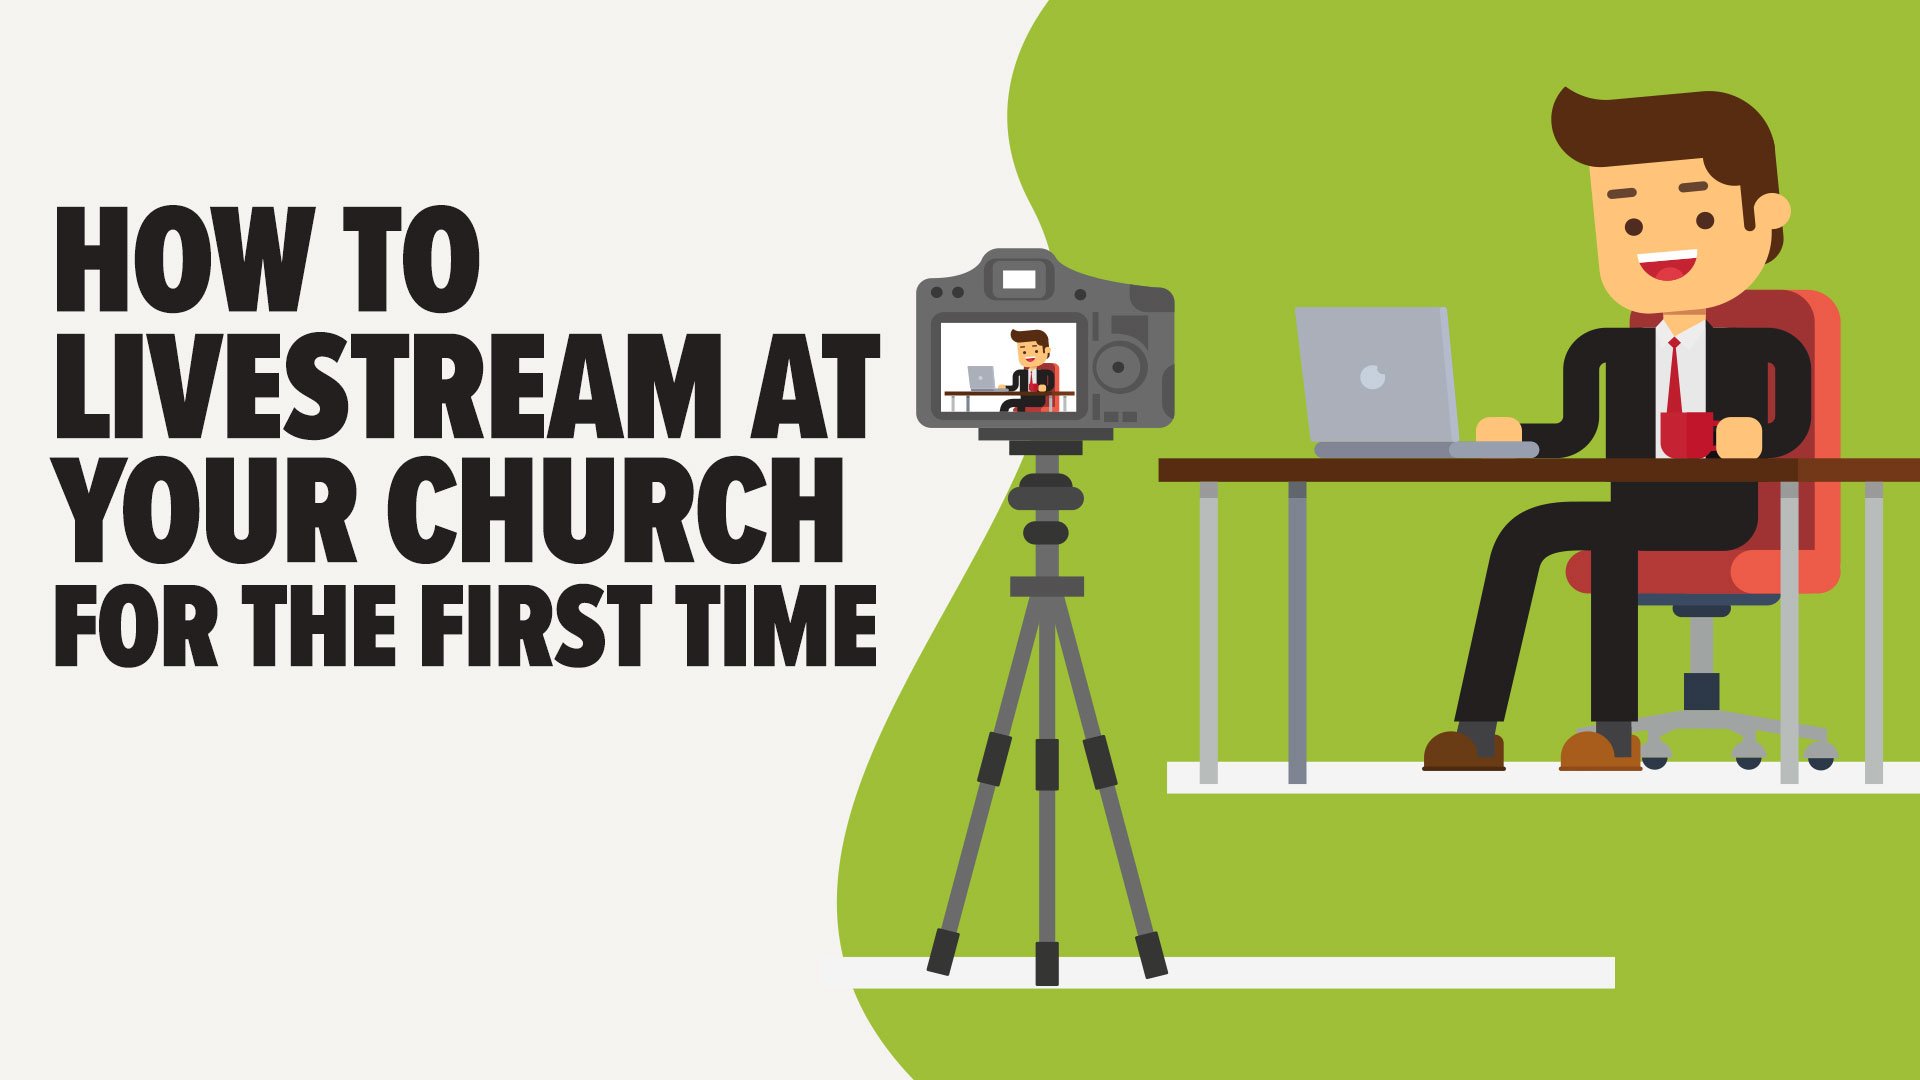 How to Livestream at Your Church for the First Time